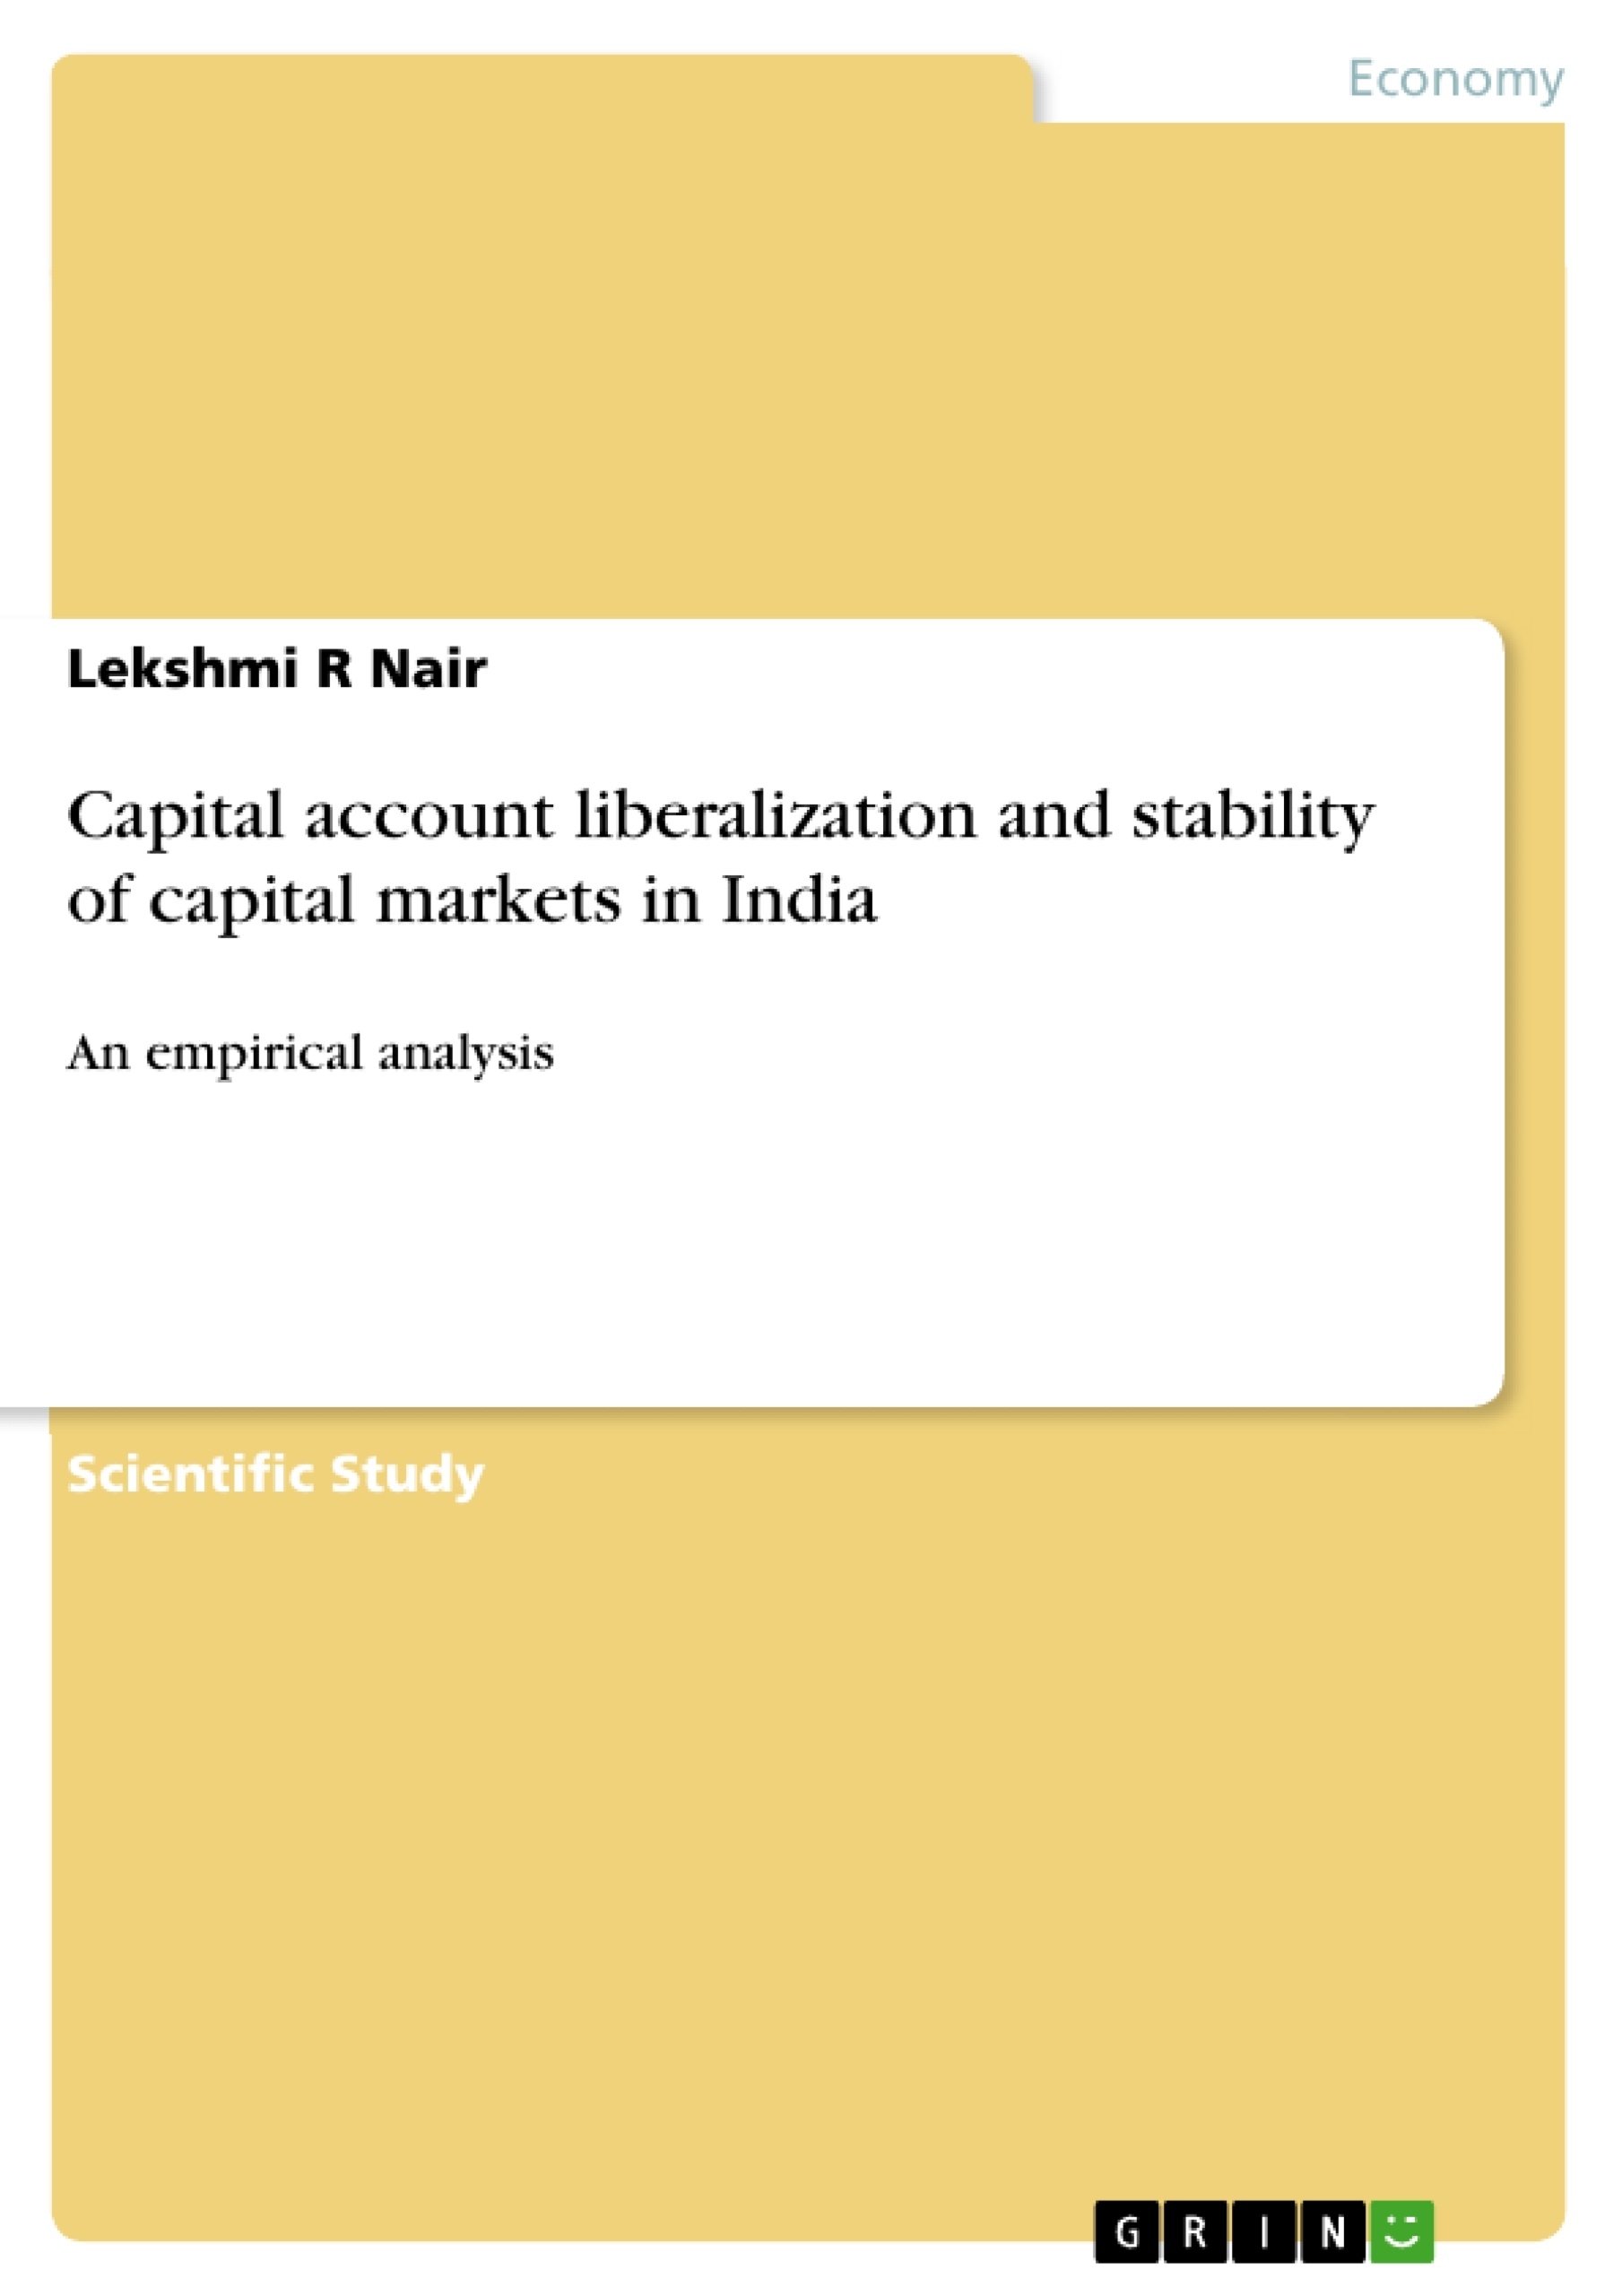 Titel: Capital  account  liberalization  and  stability  of  capital  markets  in  India